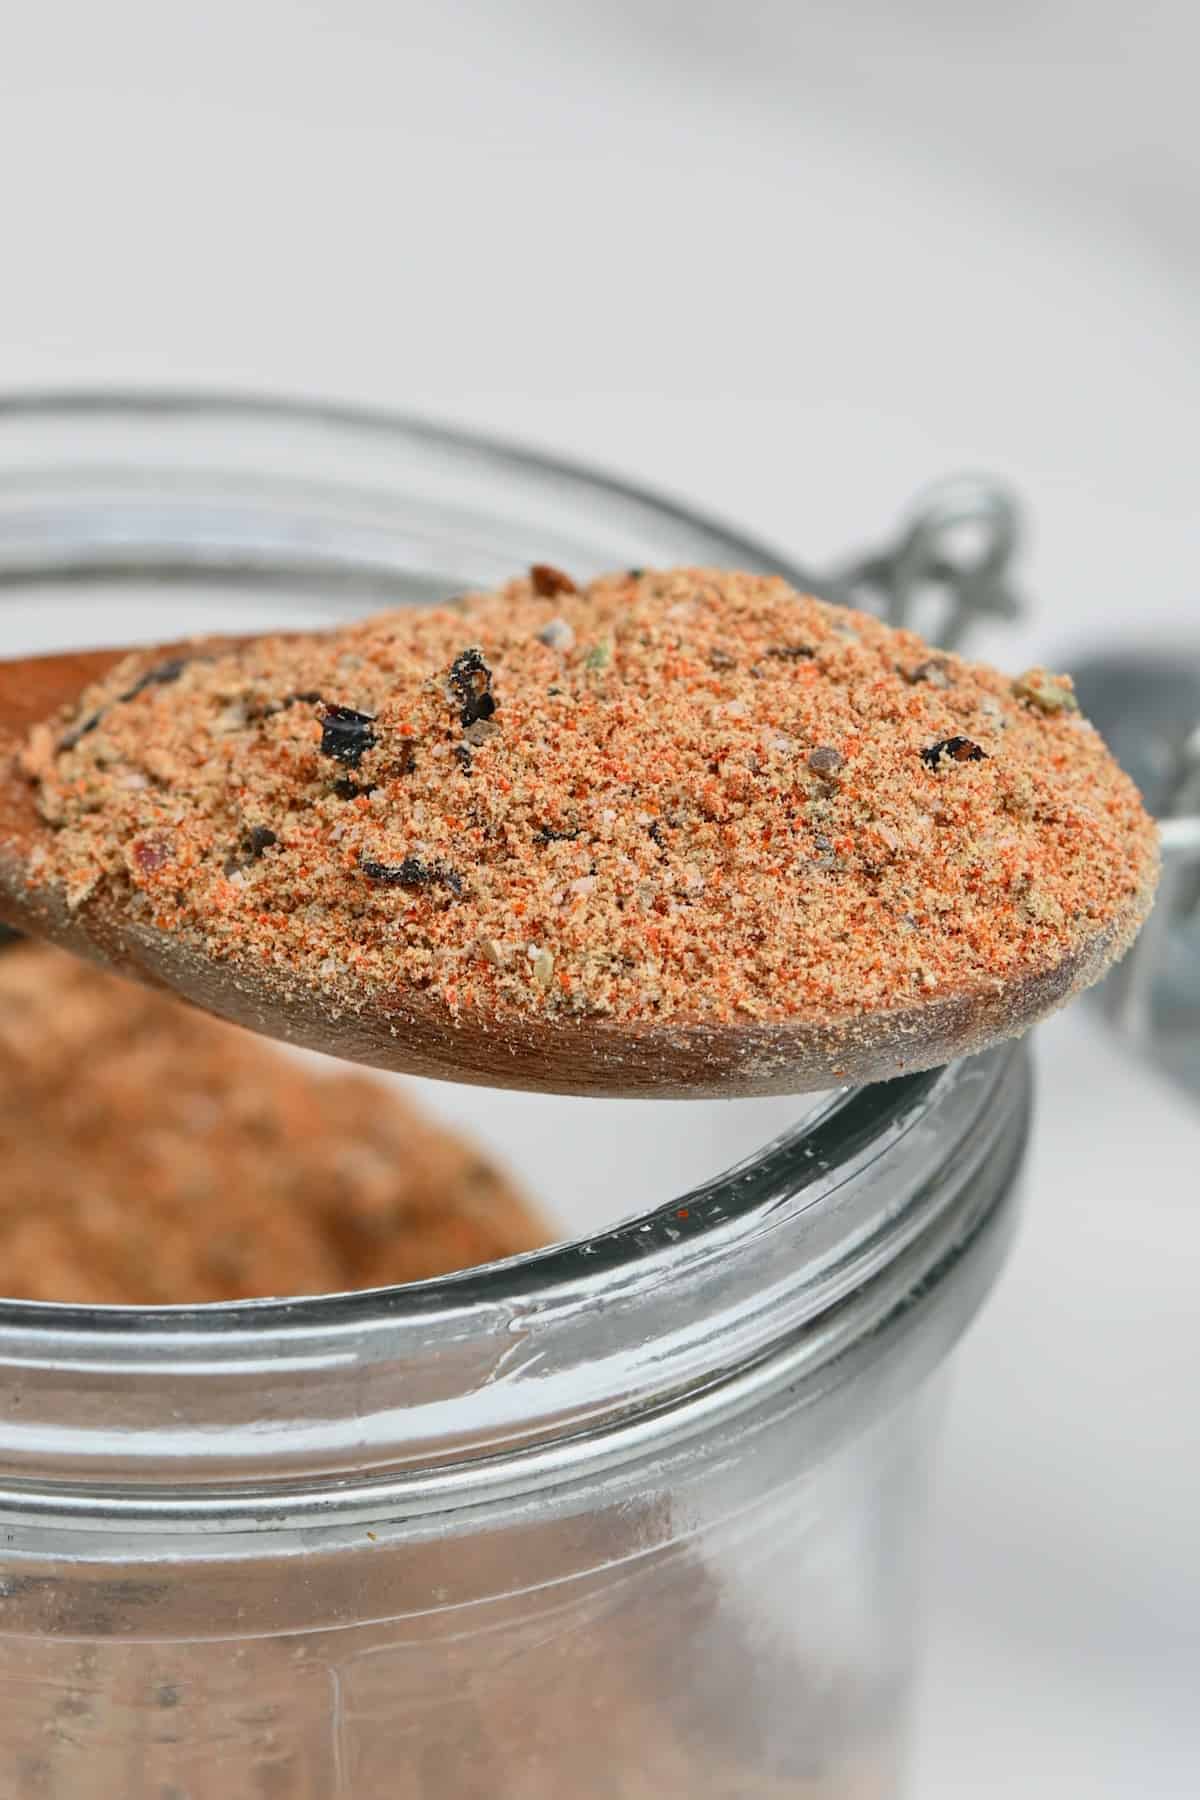 A spoonful of Mexican spice blend